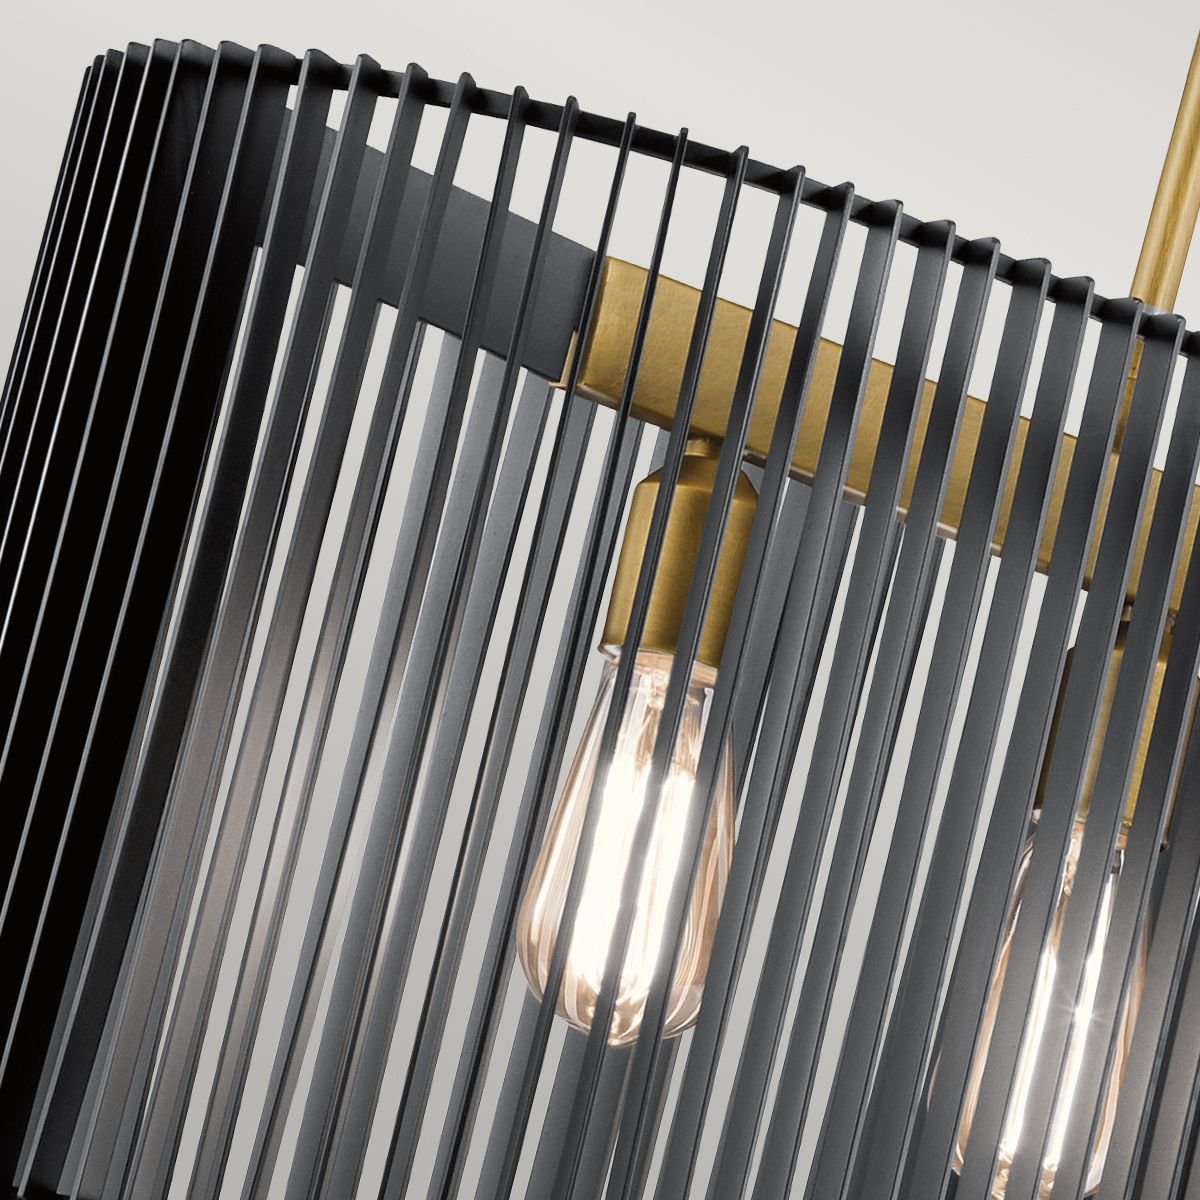 5 Light Linear Chandelier In Natural Brass With Black Slatted Shade